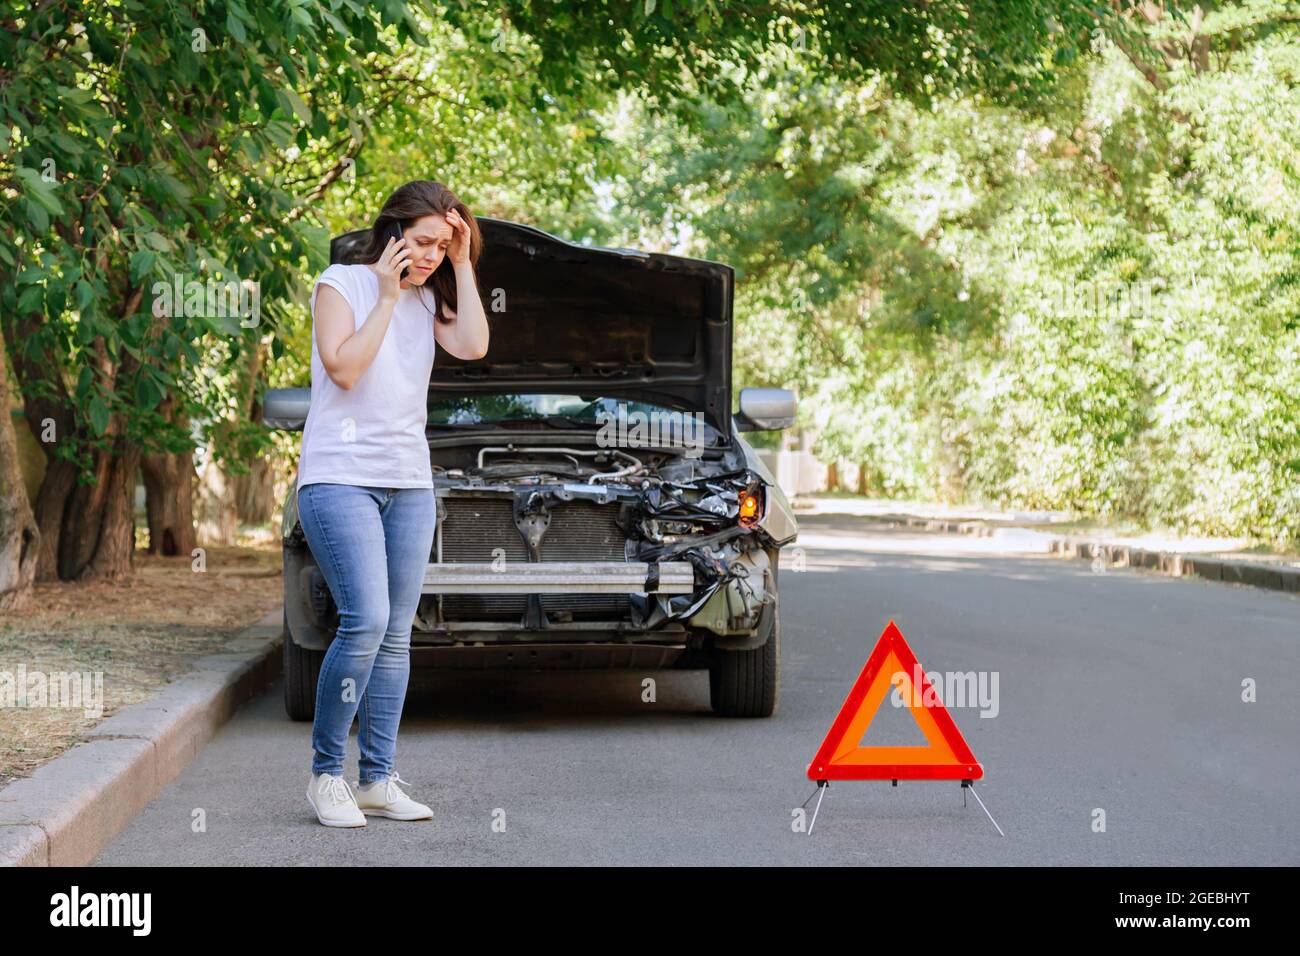 Young Woman In Front Of Broken Car In Car Accident. Woman phone calling for help and insurance after Car accident on the road with Traffic triangle Stock Photo